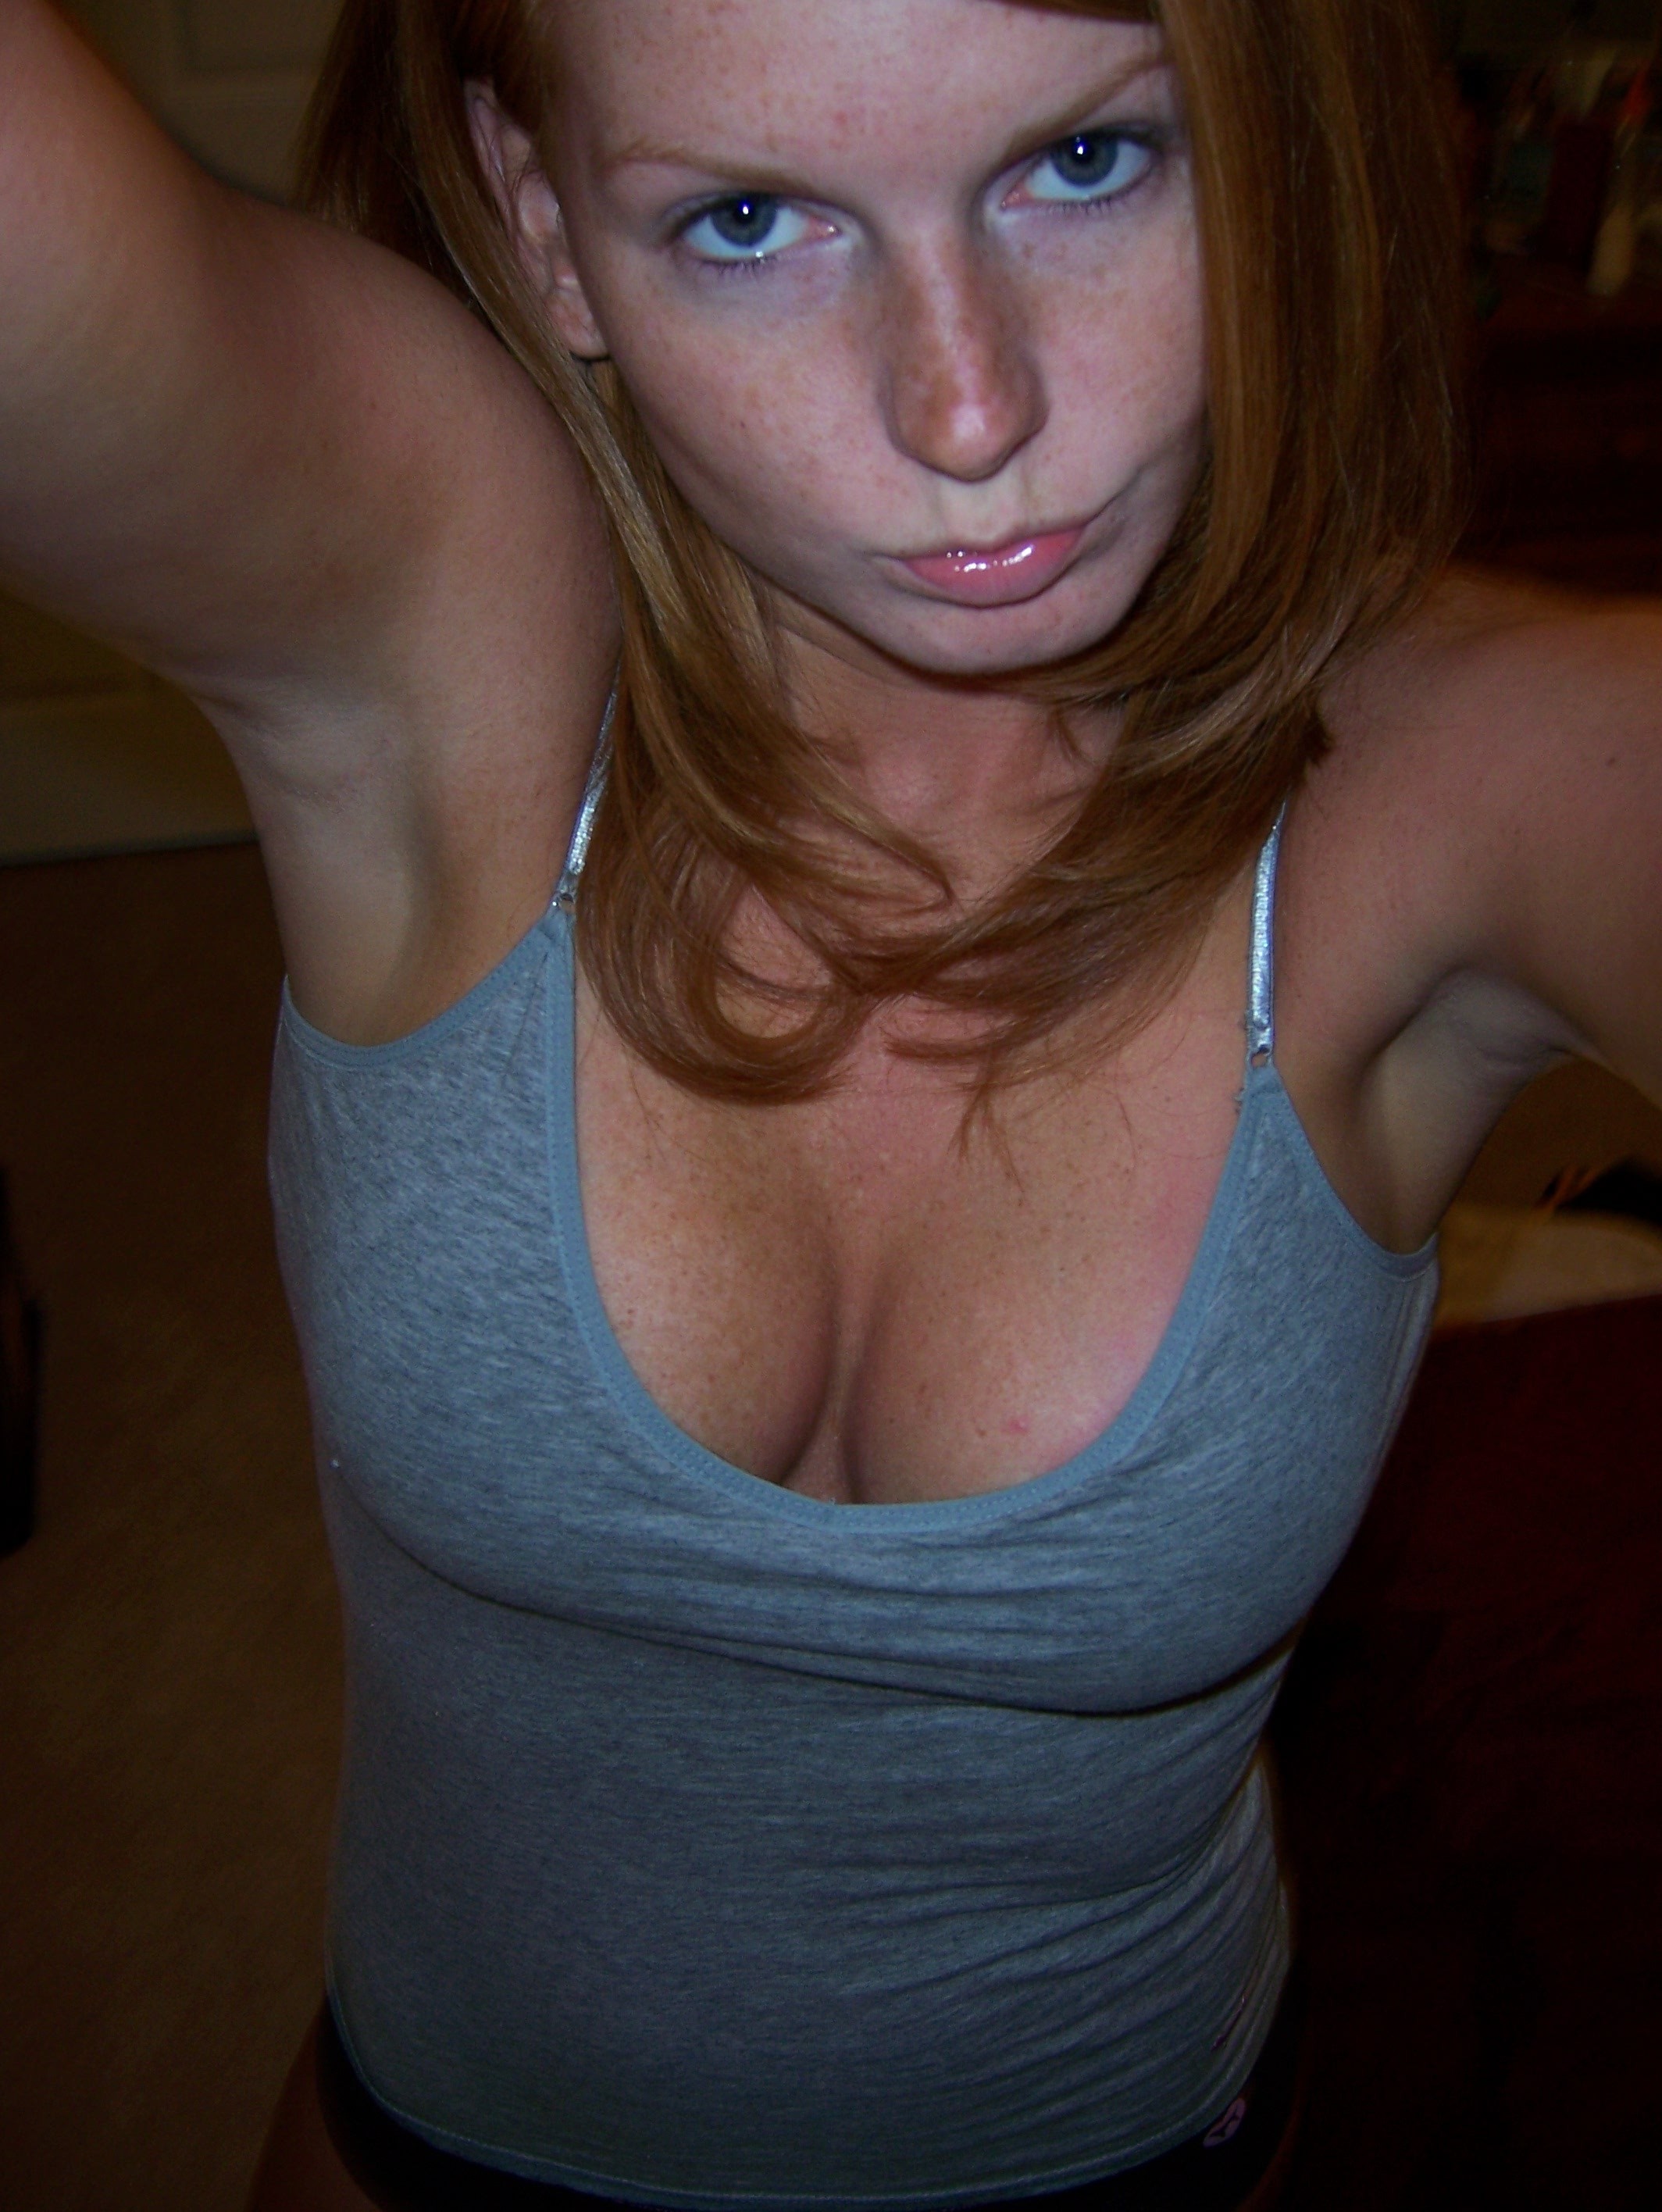 Amateur Busty Redhead Christy L Schurke with Big Tits picture pic pic